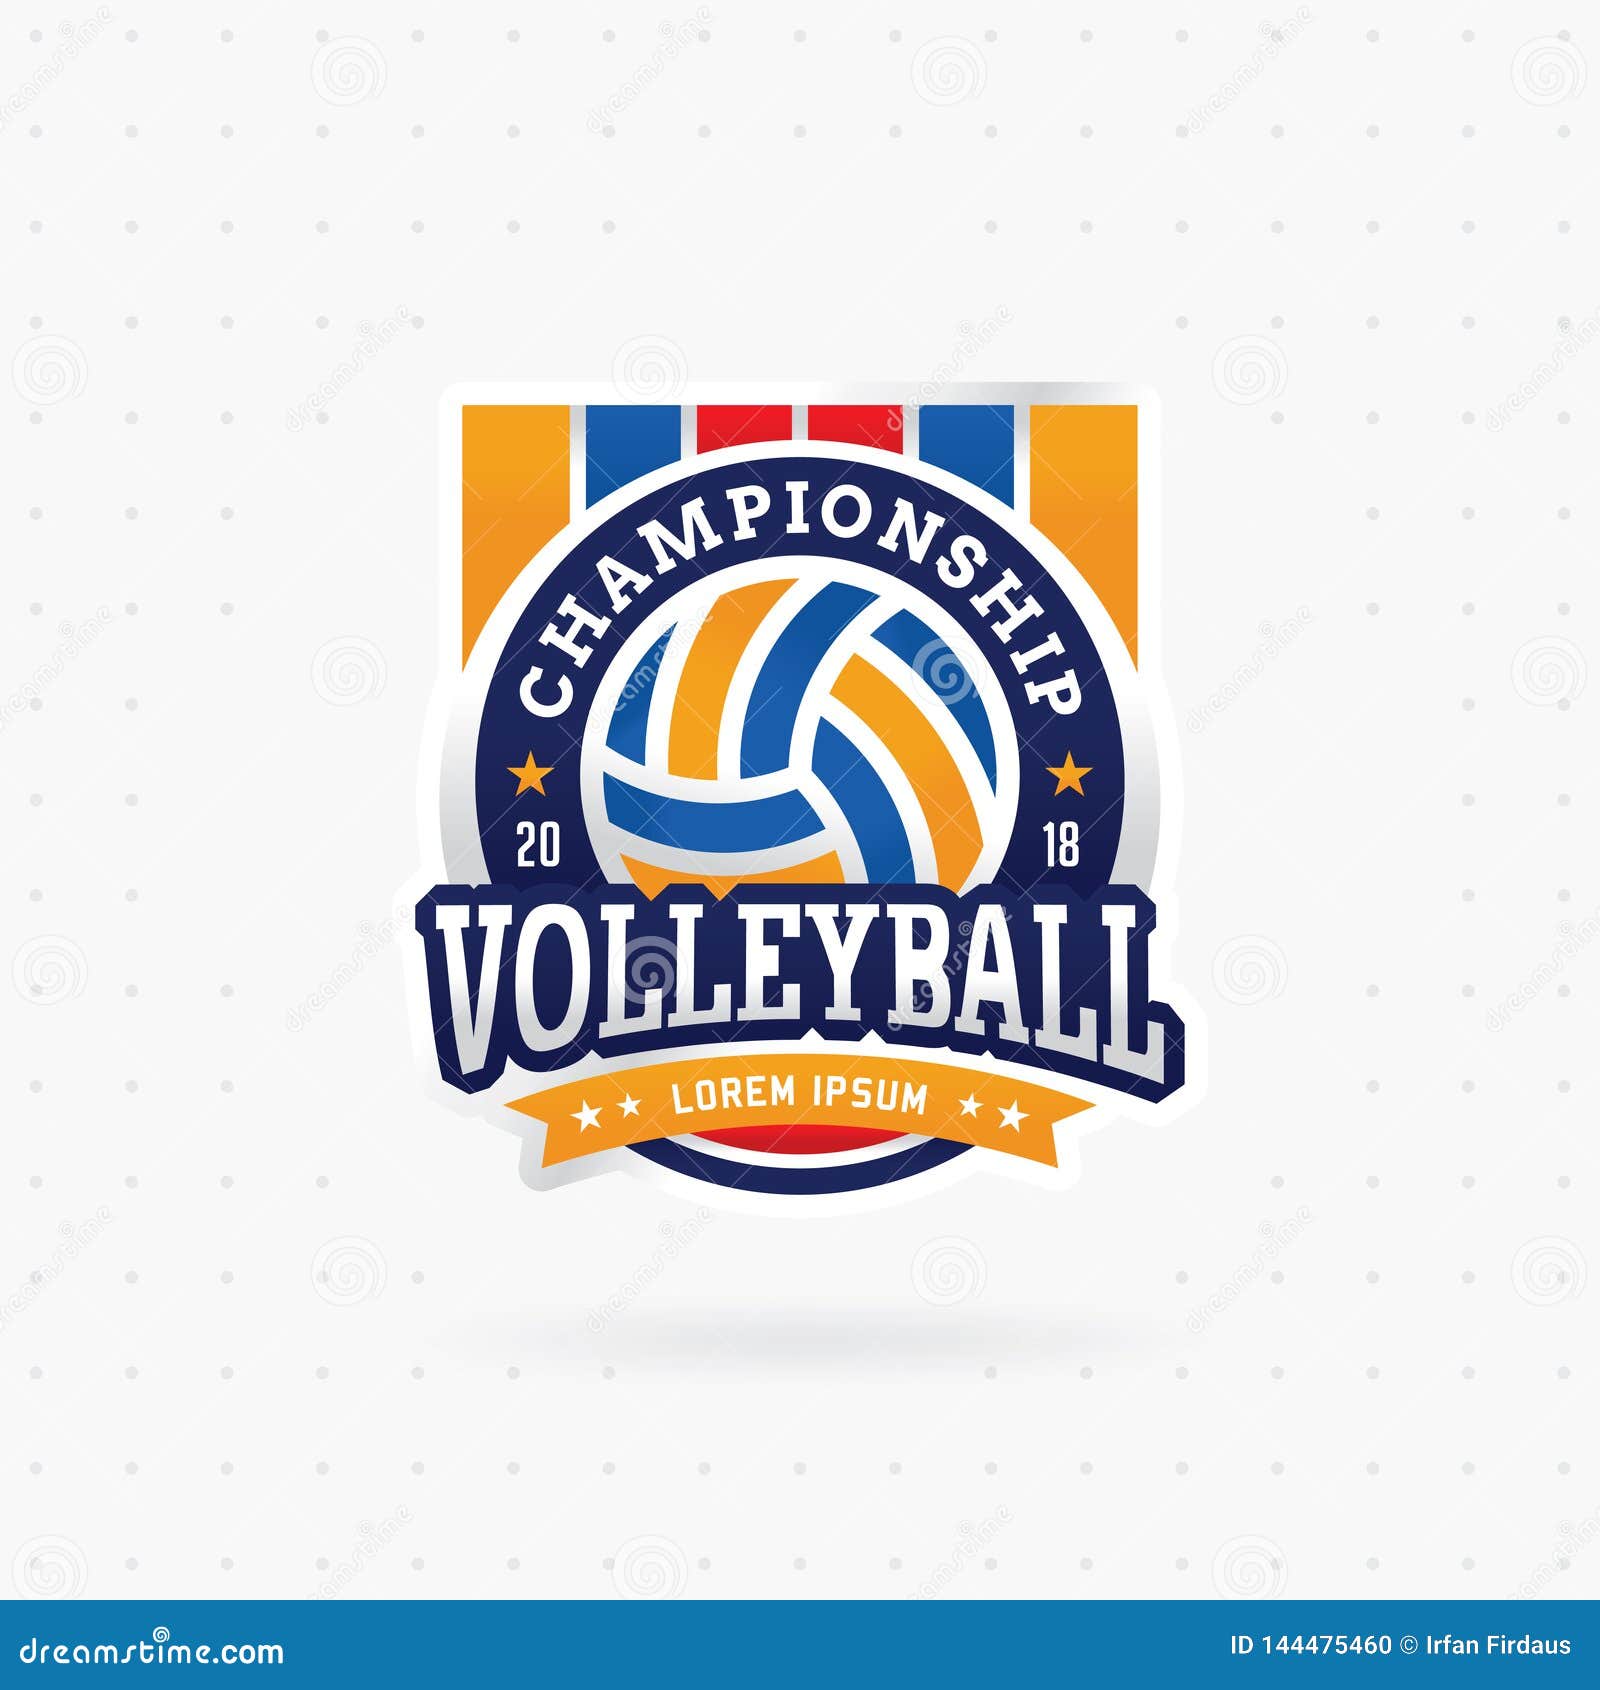 Volleyball tournament logo stock vector. Illustration of match - 144475460